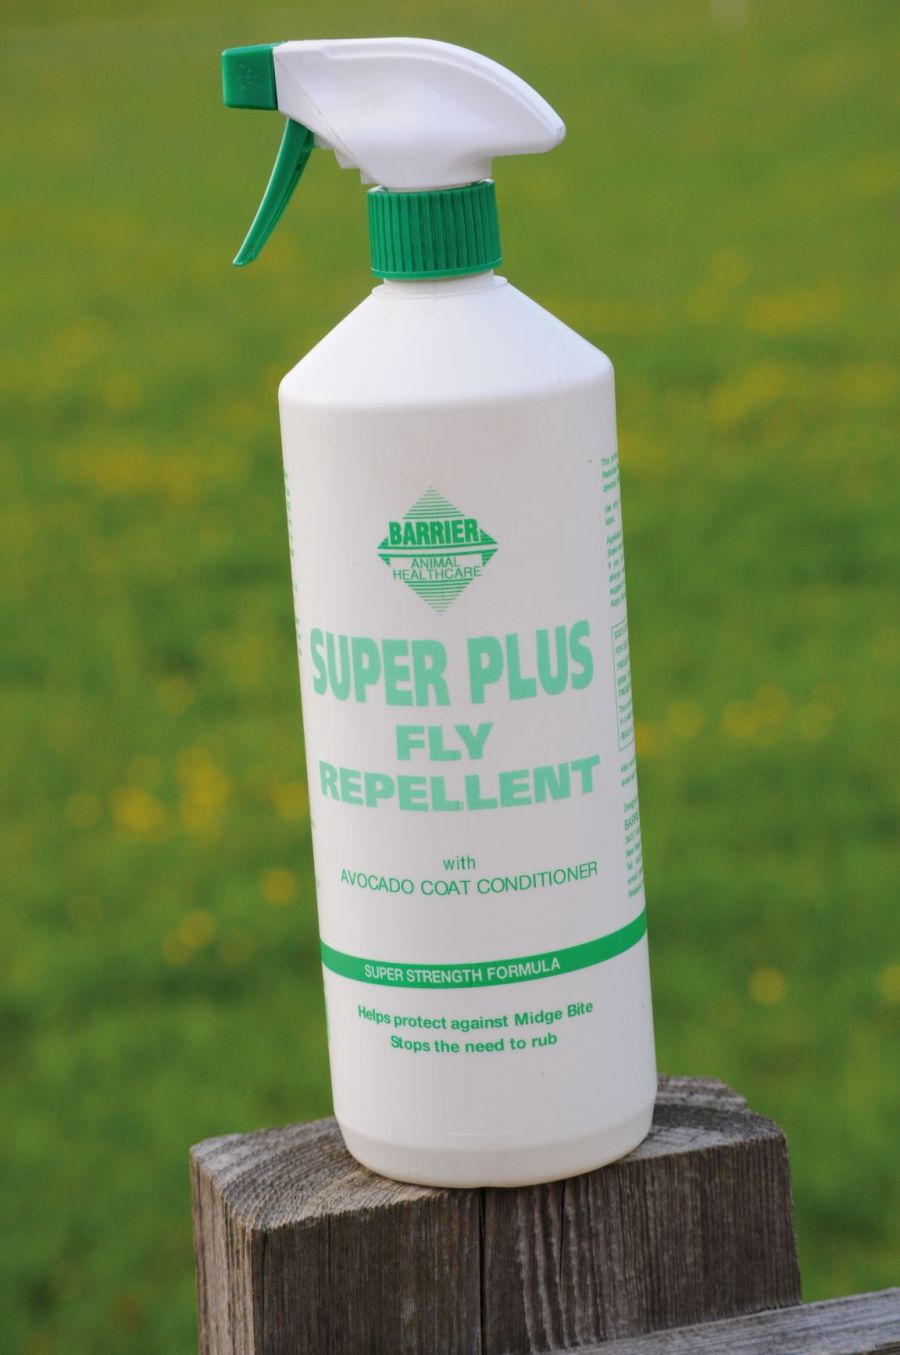 Pictured is Barrier Super Plus Fly Repellent